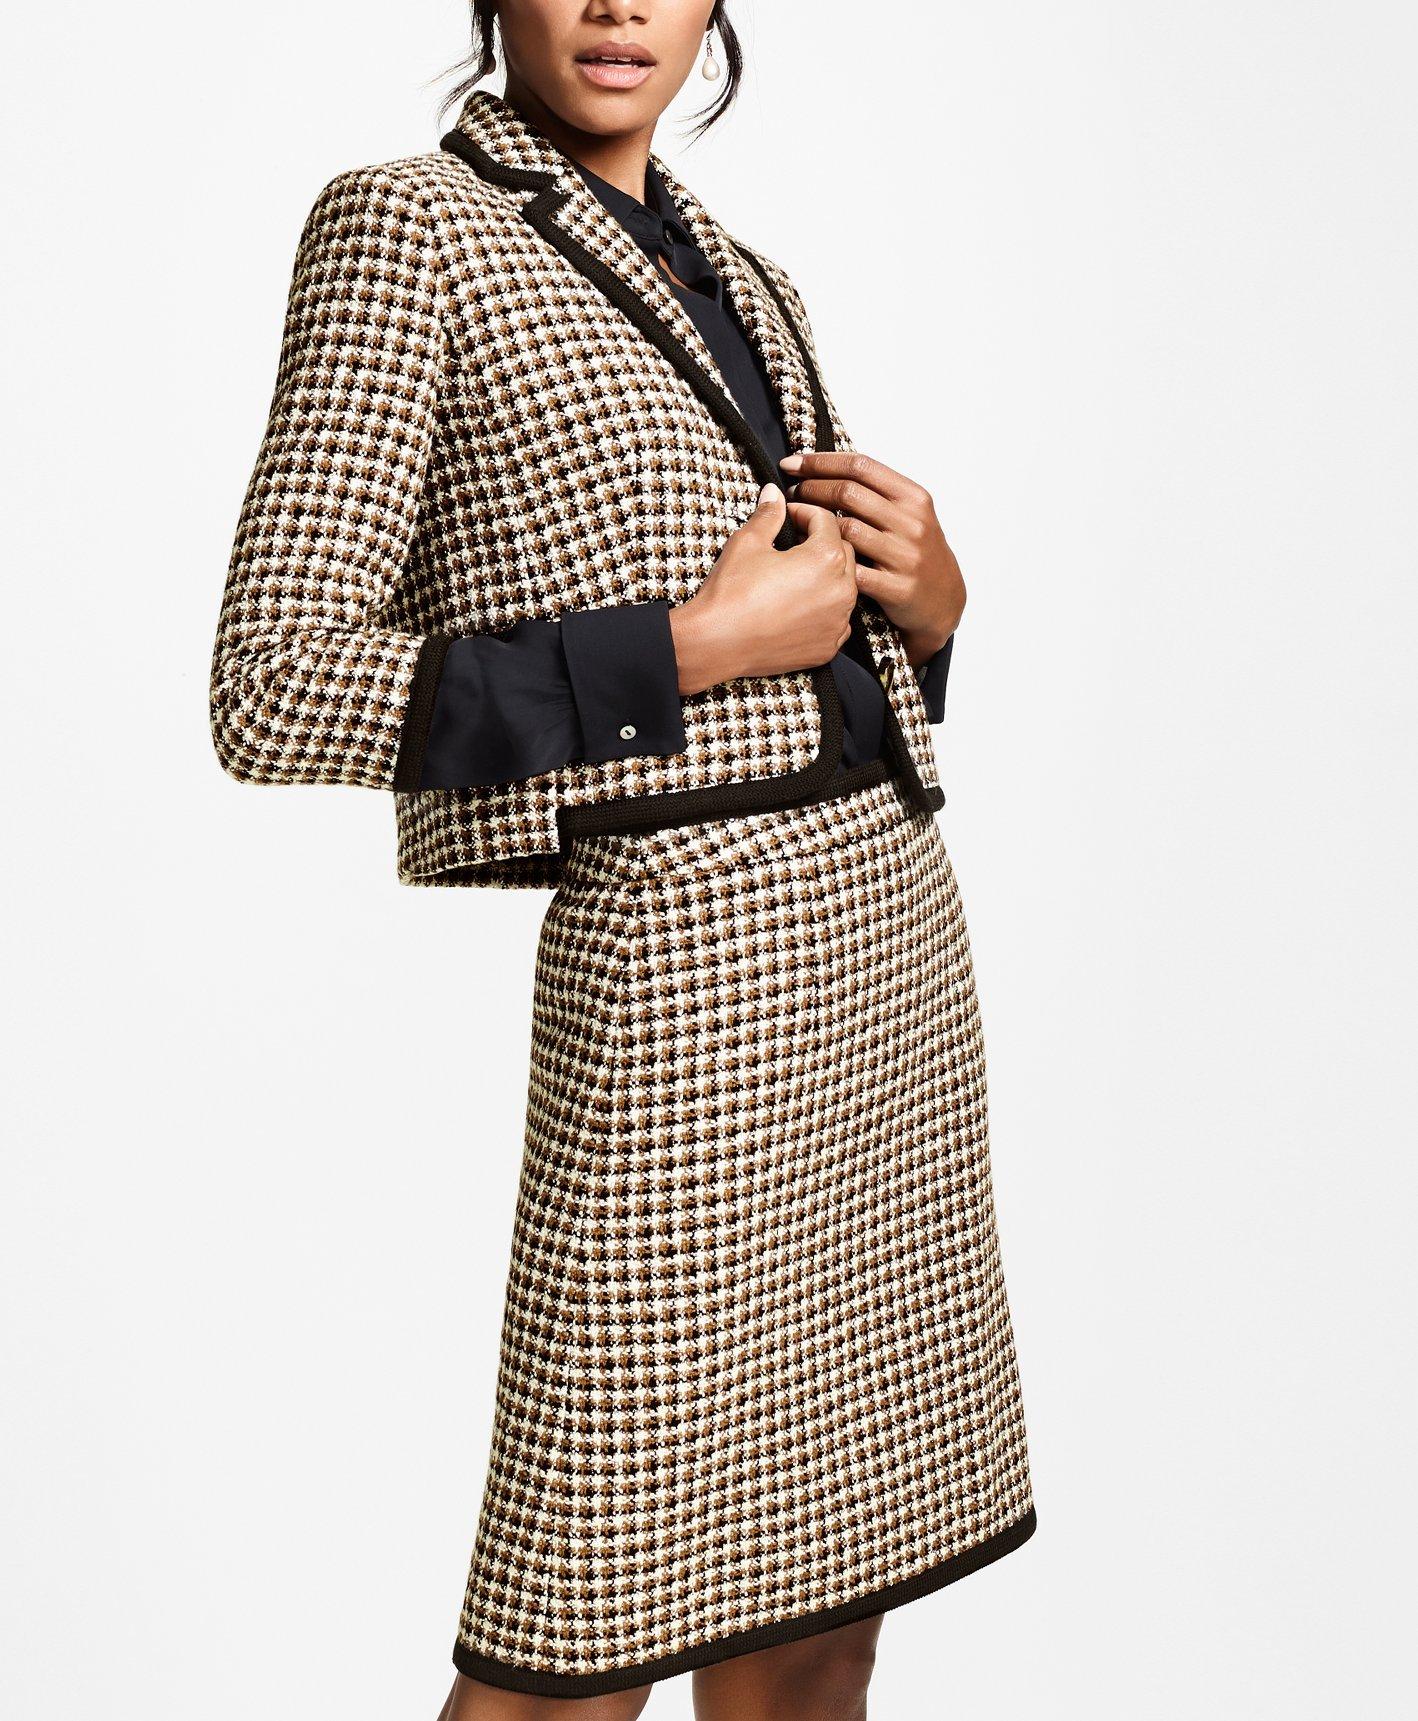 A Women's Guide On Styling A Tweed Jacket